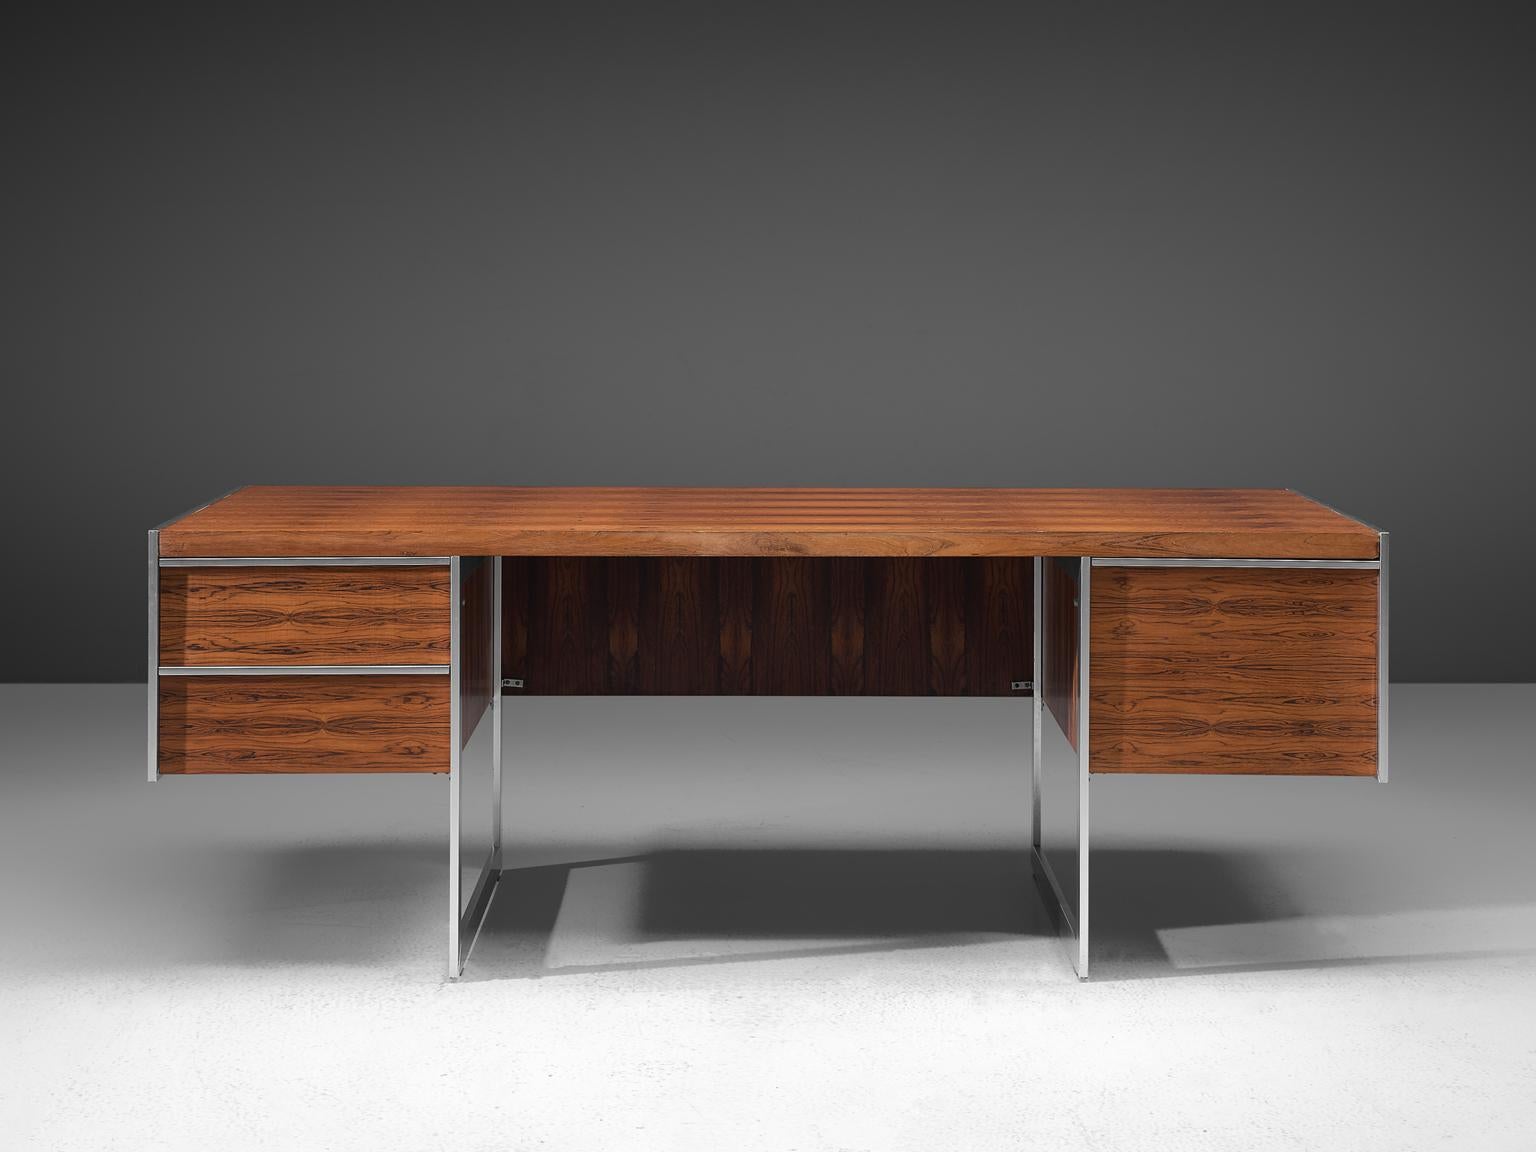 Howard Miller for MDA, desk, rosewood and metal, United Kingdom, 1960s.

This modern 1960s executive's desk by Howard Miller for MDA features beautiful elements, for instance the rosewood with stunning dark flames in the veneer. This piece shows